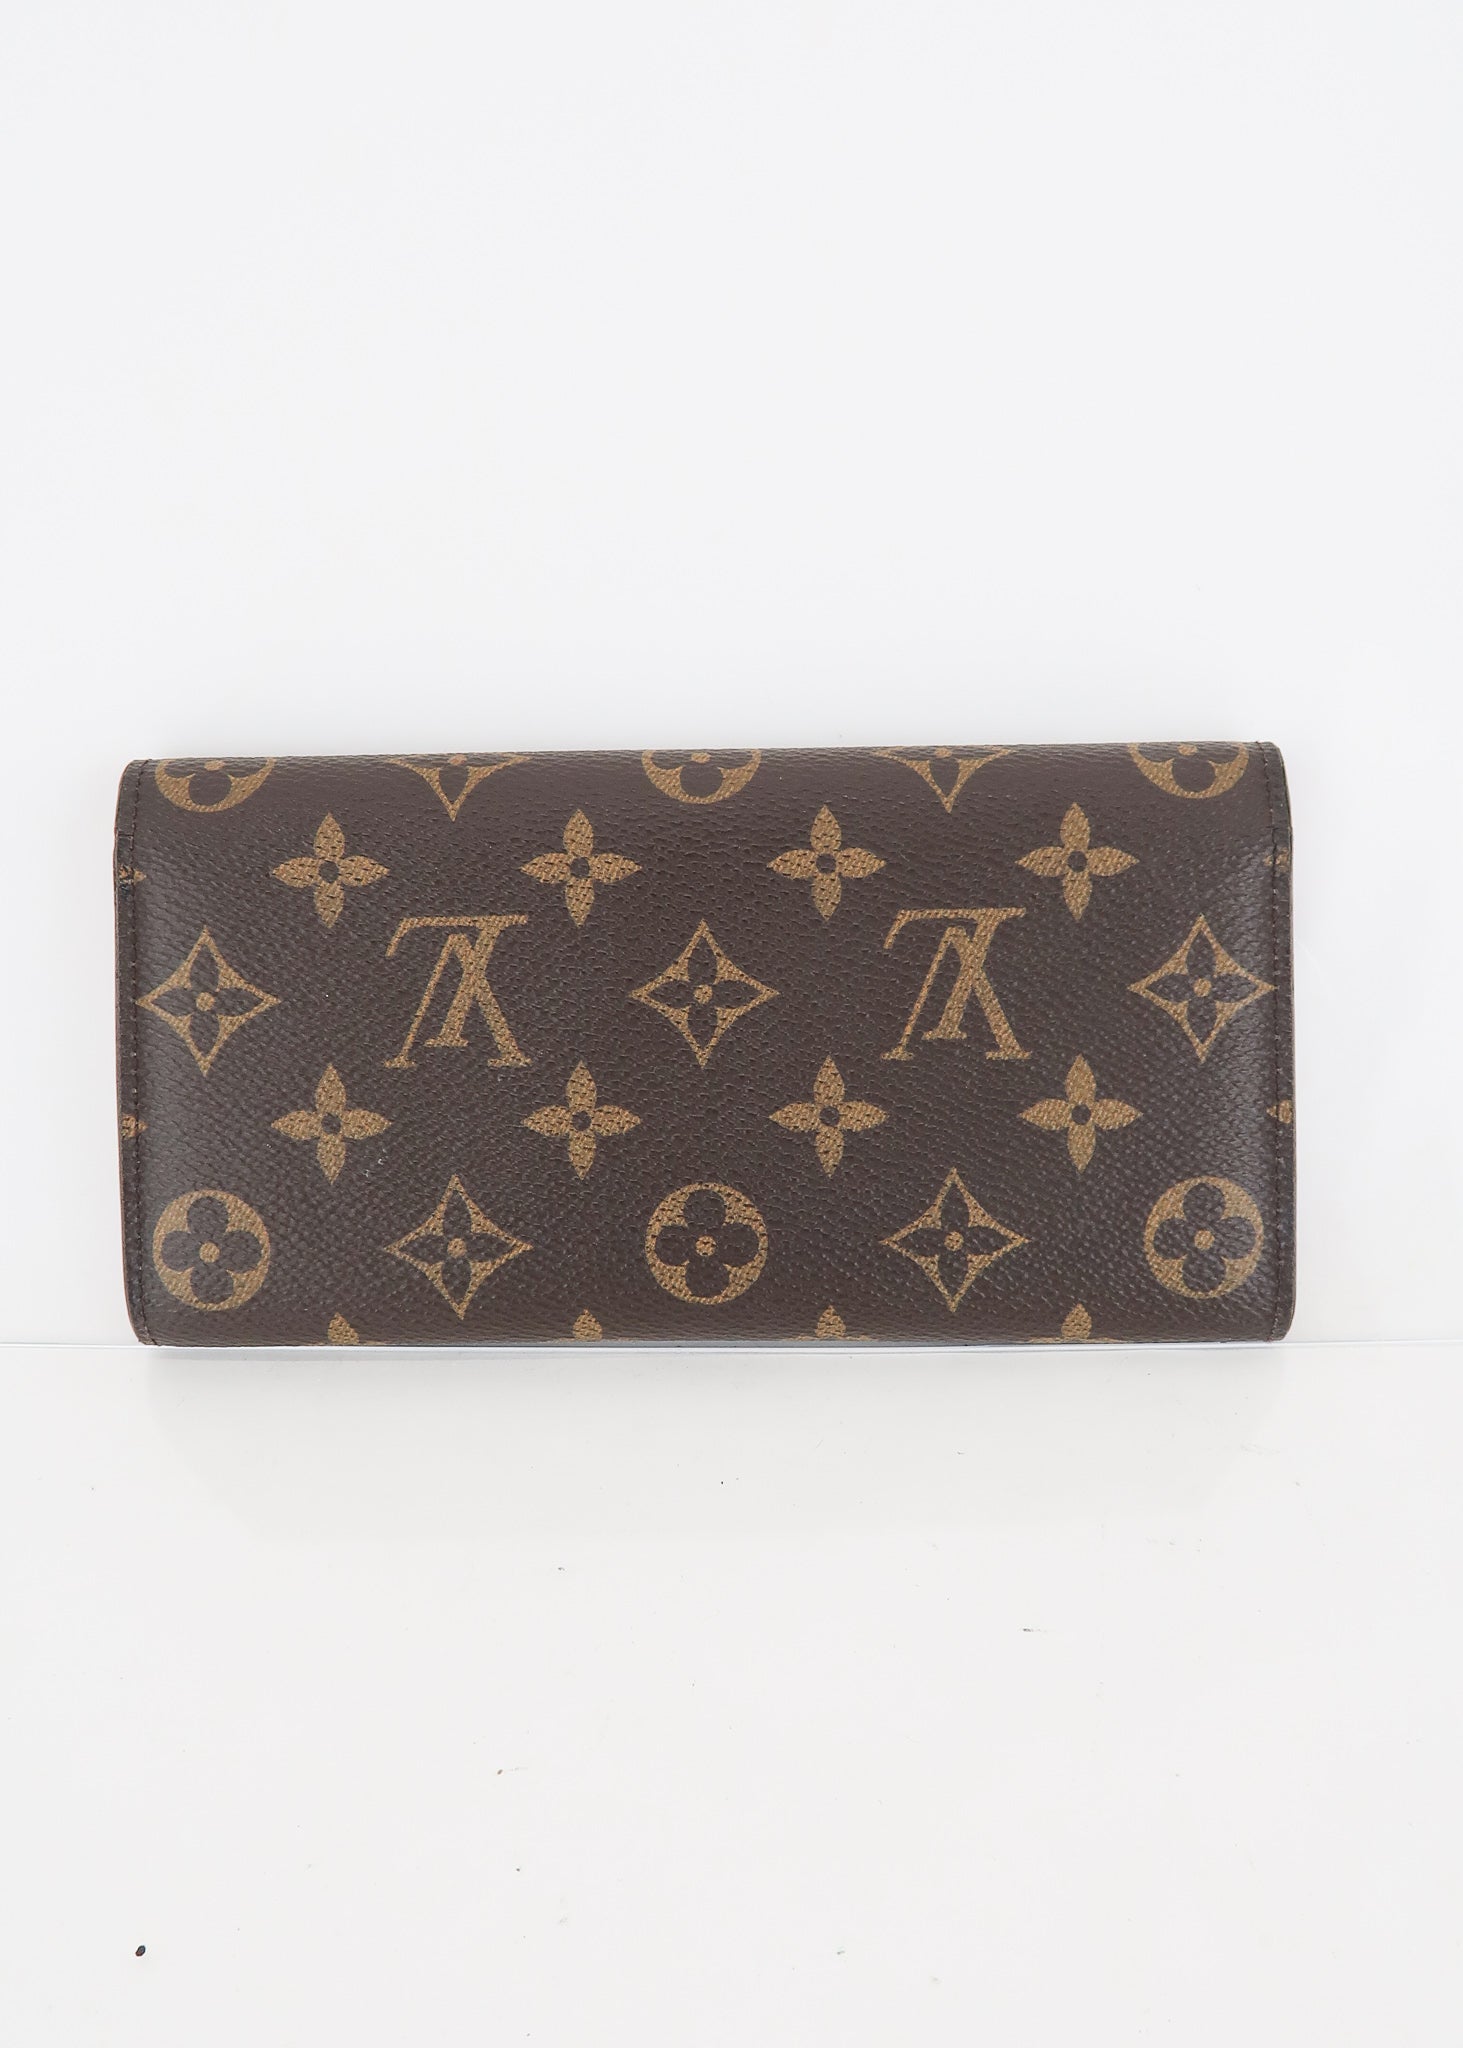 Spotted while shopping on Poshmark: Louis Vuitton Emilie wallet